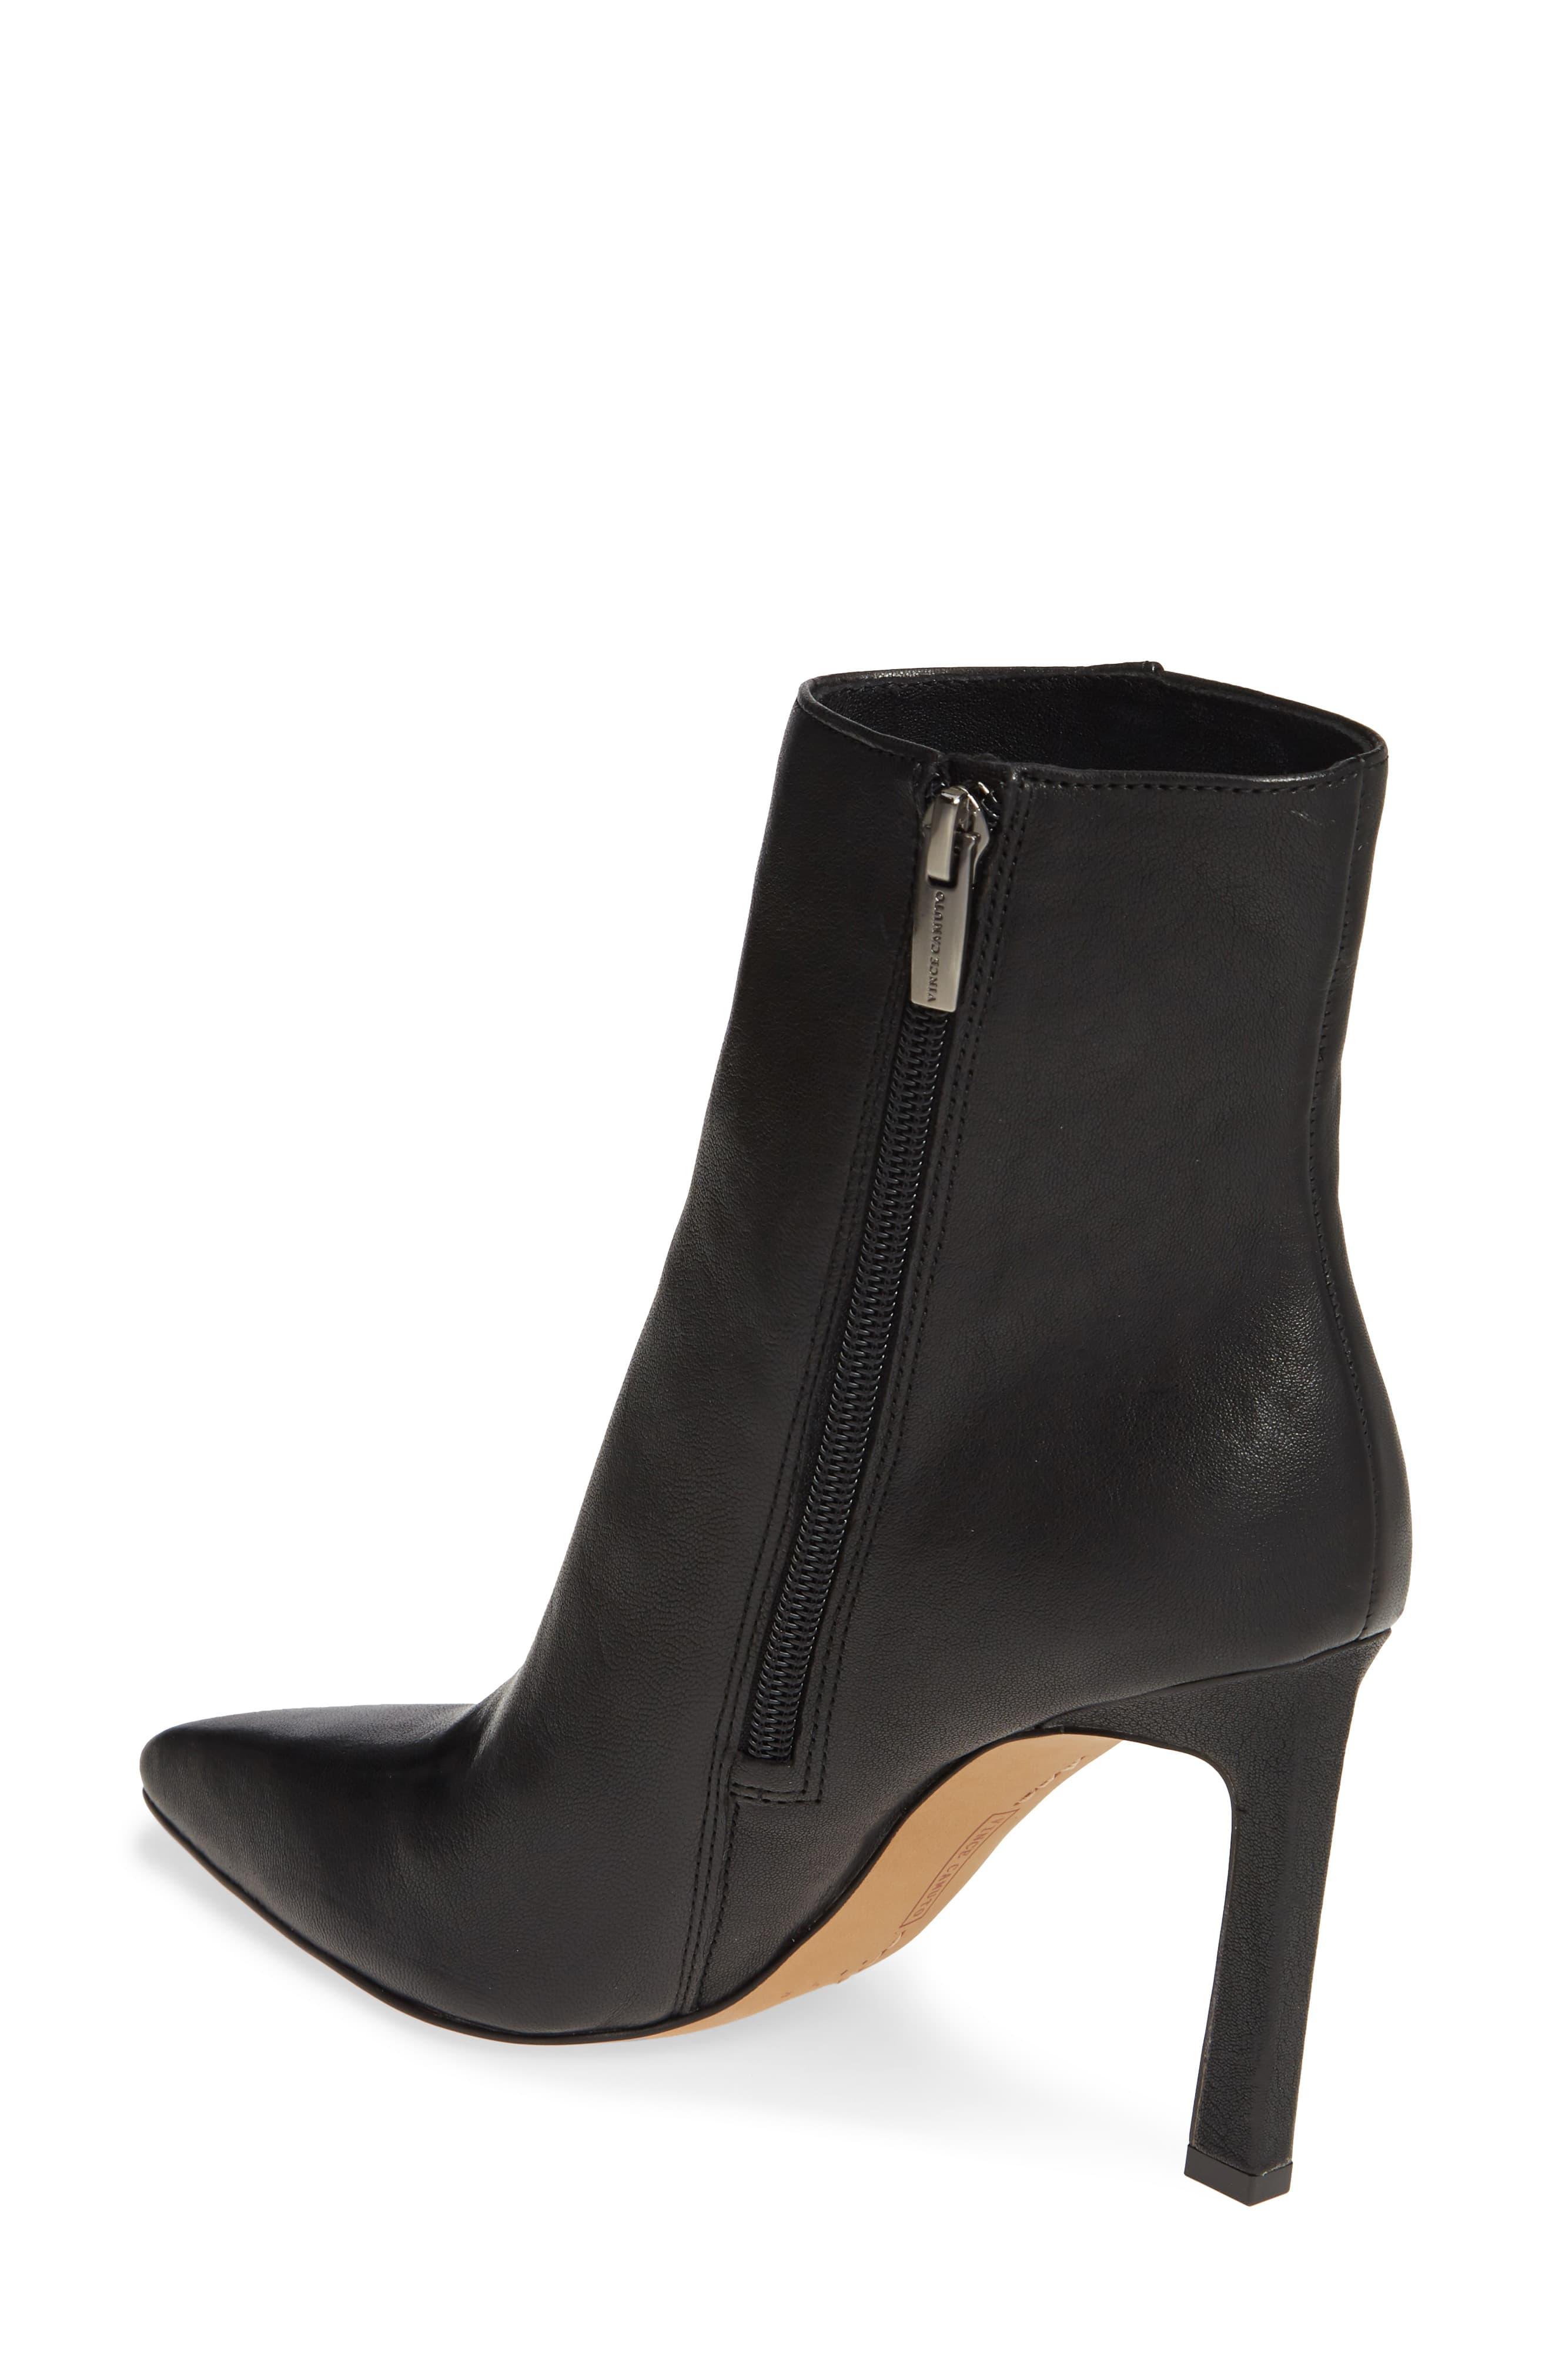 Vince Camuto Sashala Pointed Toe Bootie in Black Leather (Black) - Lyst